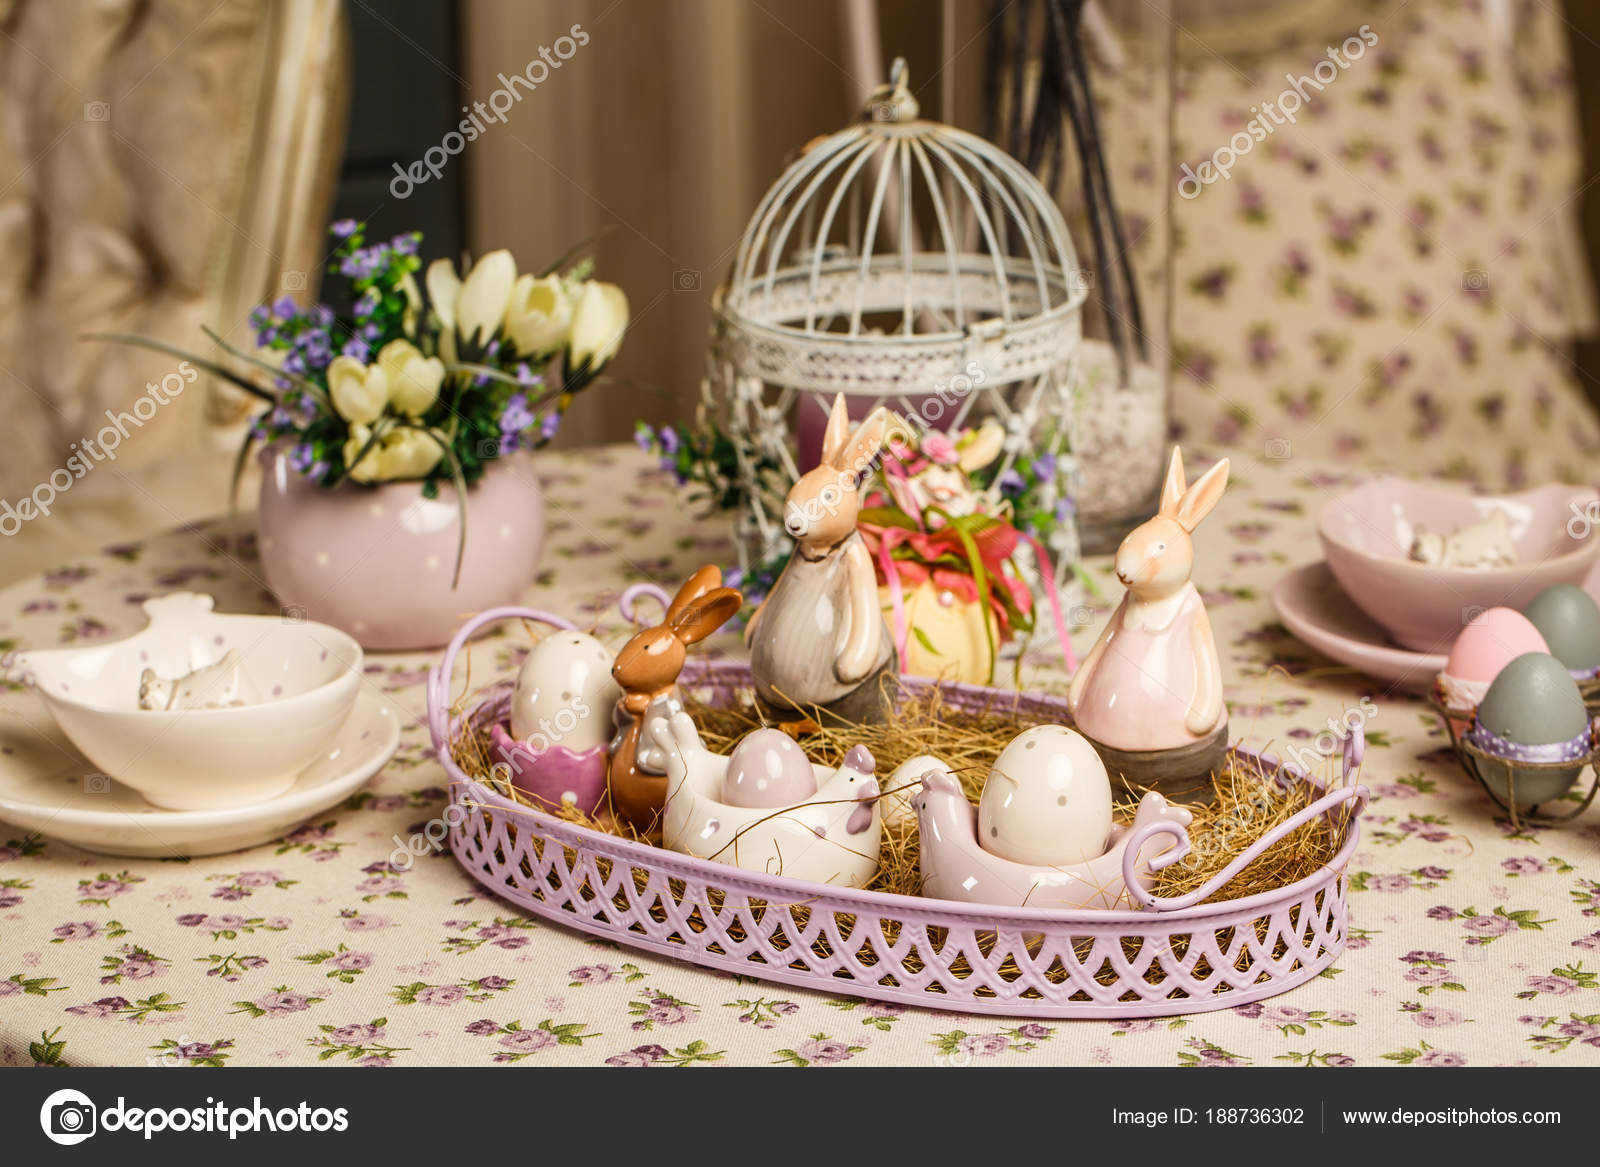 Beautiful Easter Pastel Decorations With Table Setting